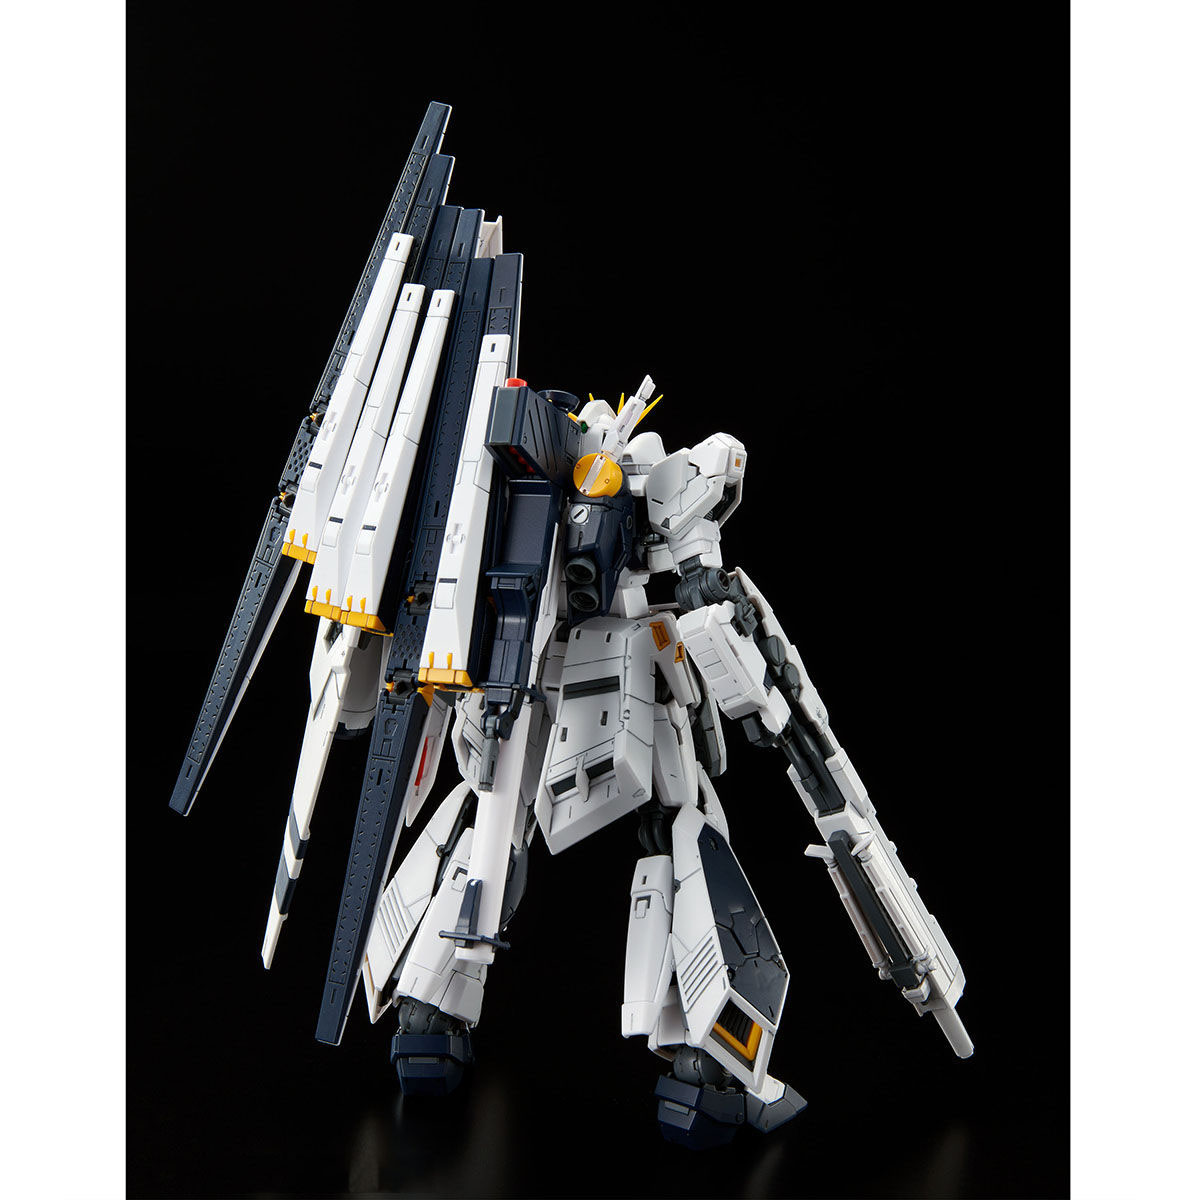 Rg 1 144 Hws Expansion Set For N Gundam Apr 21 Delivery Gundam Premium Bandai Singapore Online Store For Action Figures Model Kits Toys And More